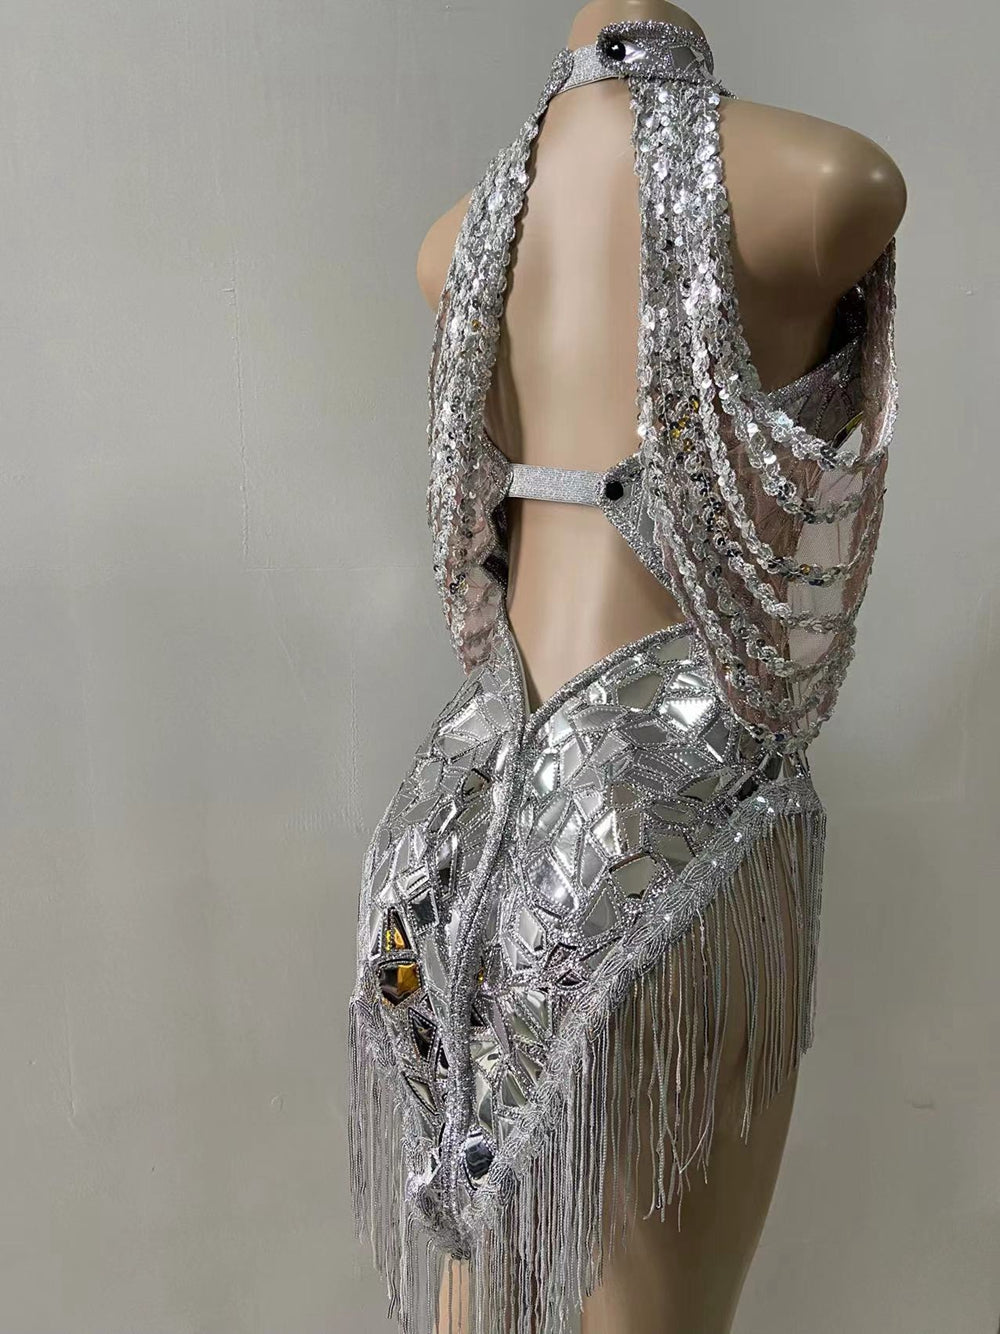 Shining Silver Sequins Backless Dress Sexy Tassel Dress Dance Costume Nightclub Outfit Performance Show Stage Wear